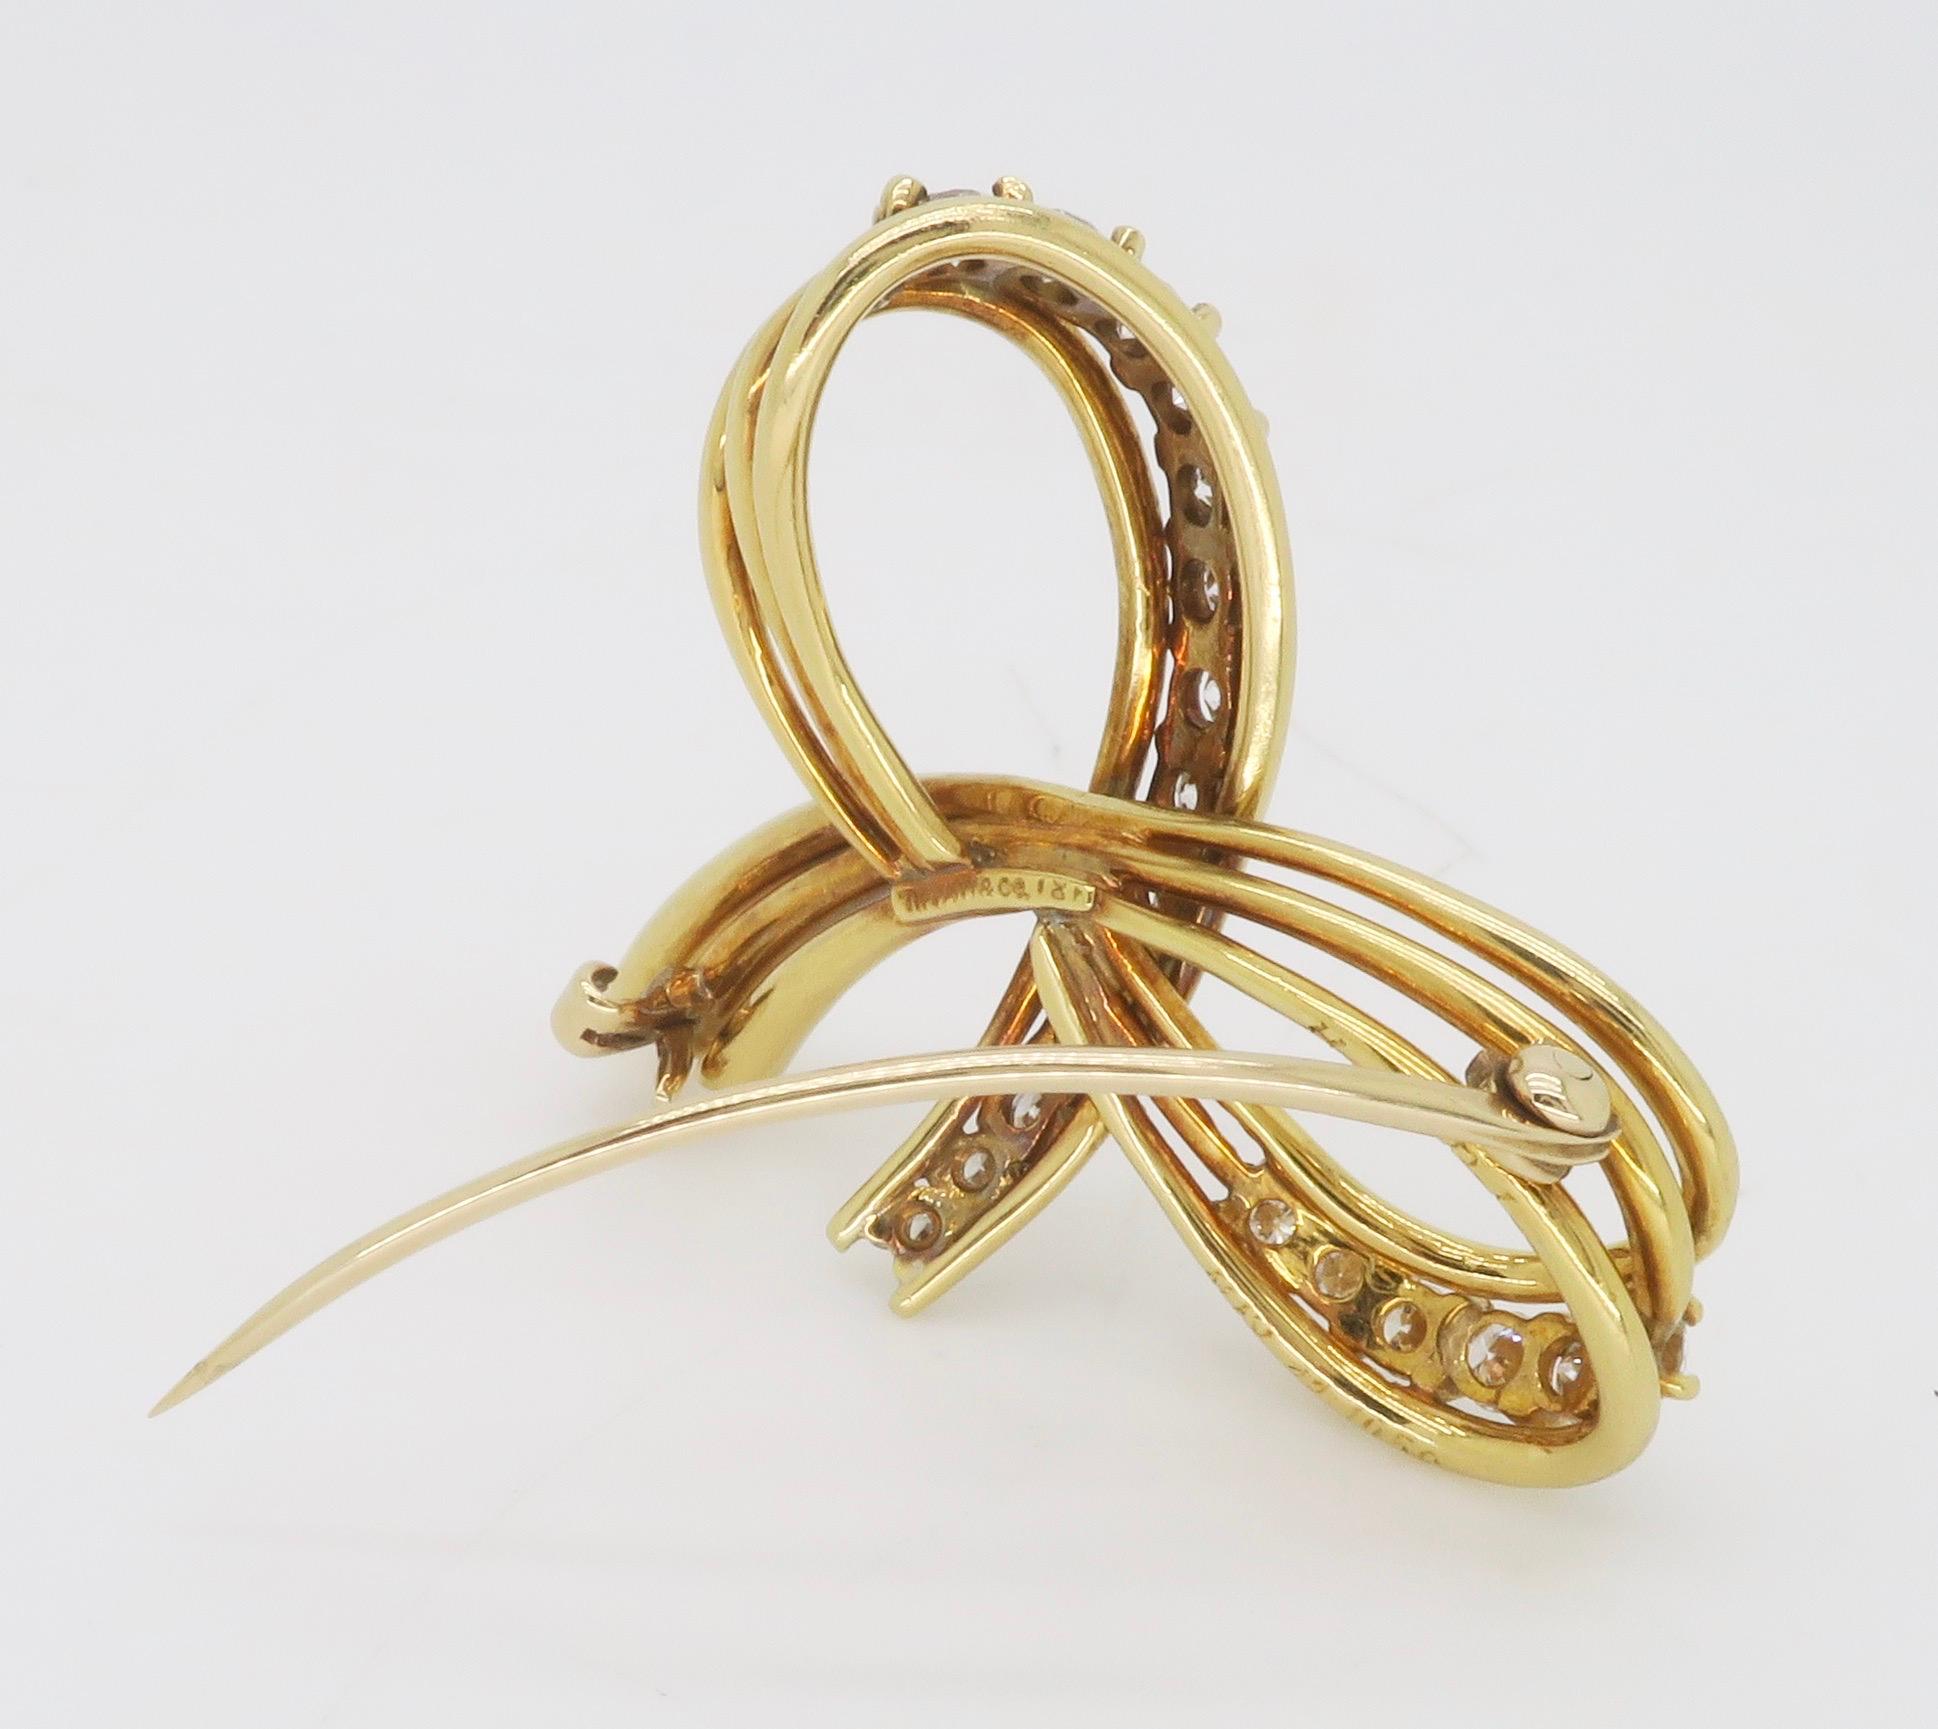 Vintage Tiffany & Co. Diamond Bow Brooch in 18k Yellow Gold  For Sale 4